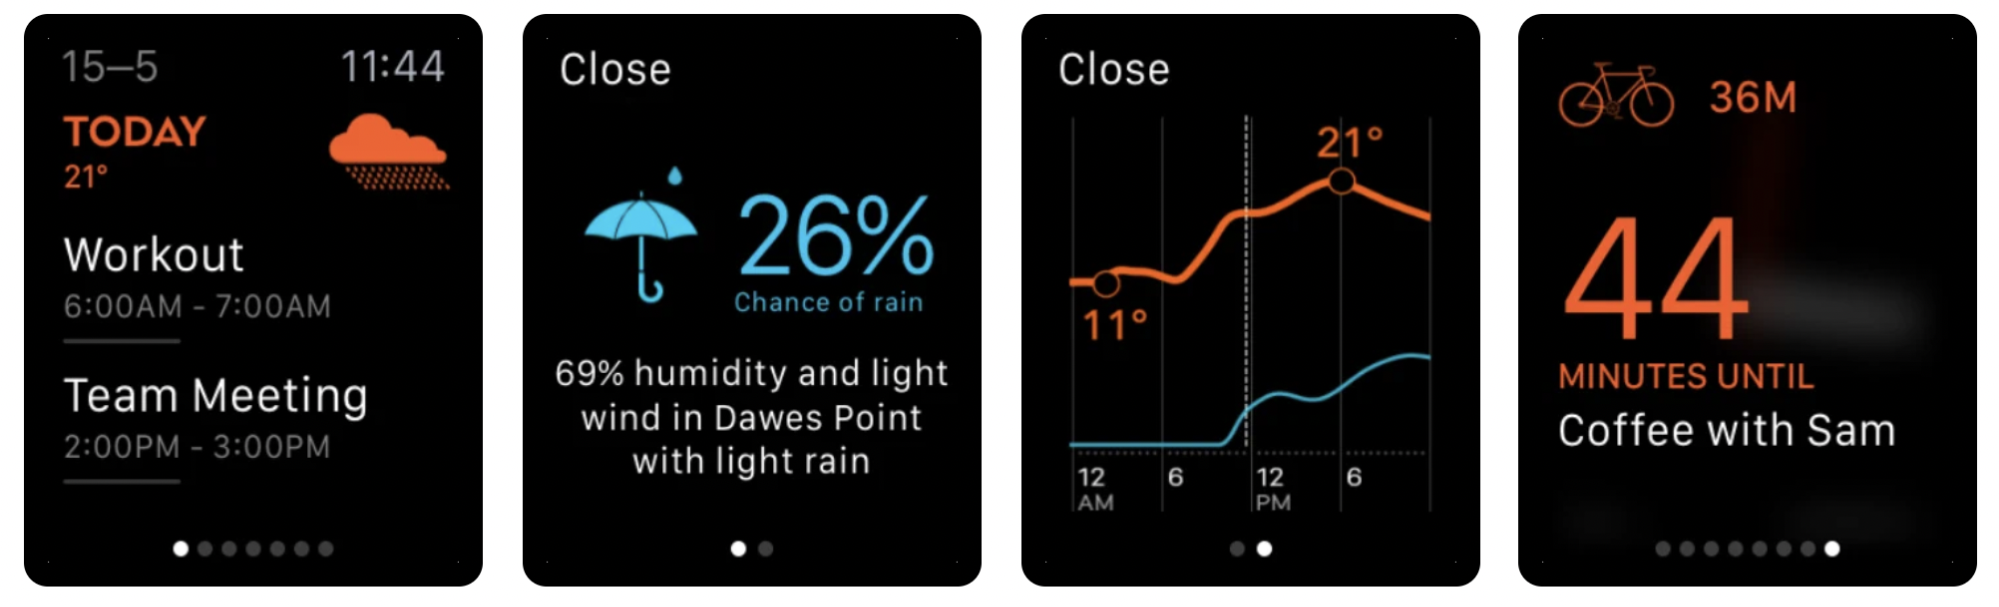 4 examples of the Timepage interface on the Apple Watch